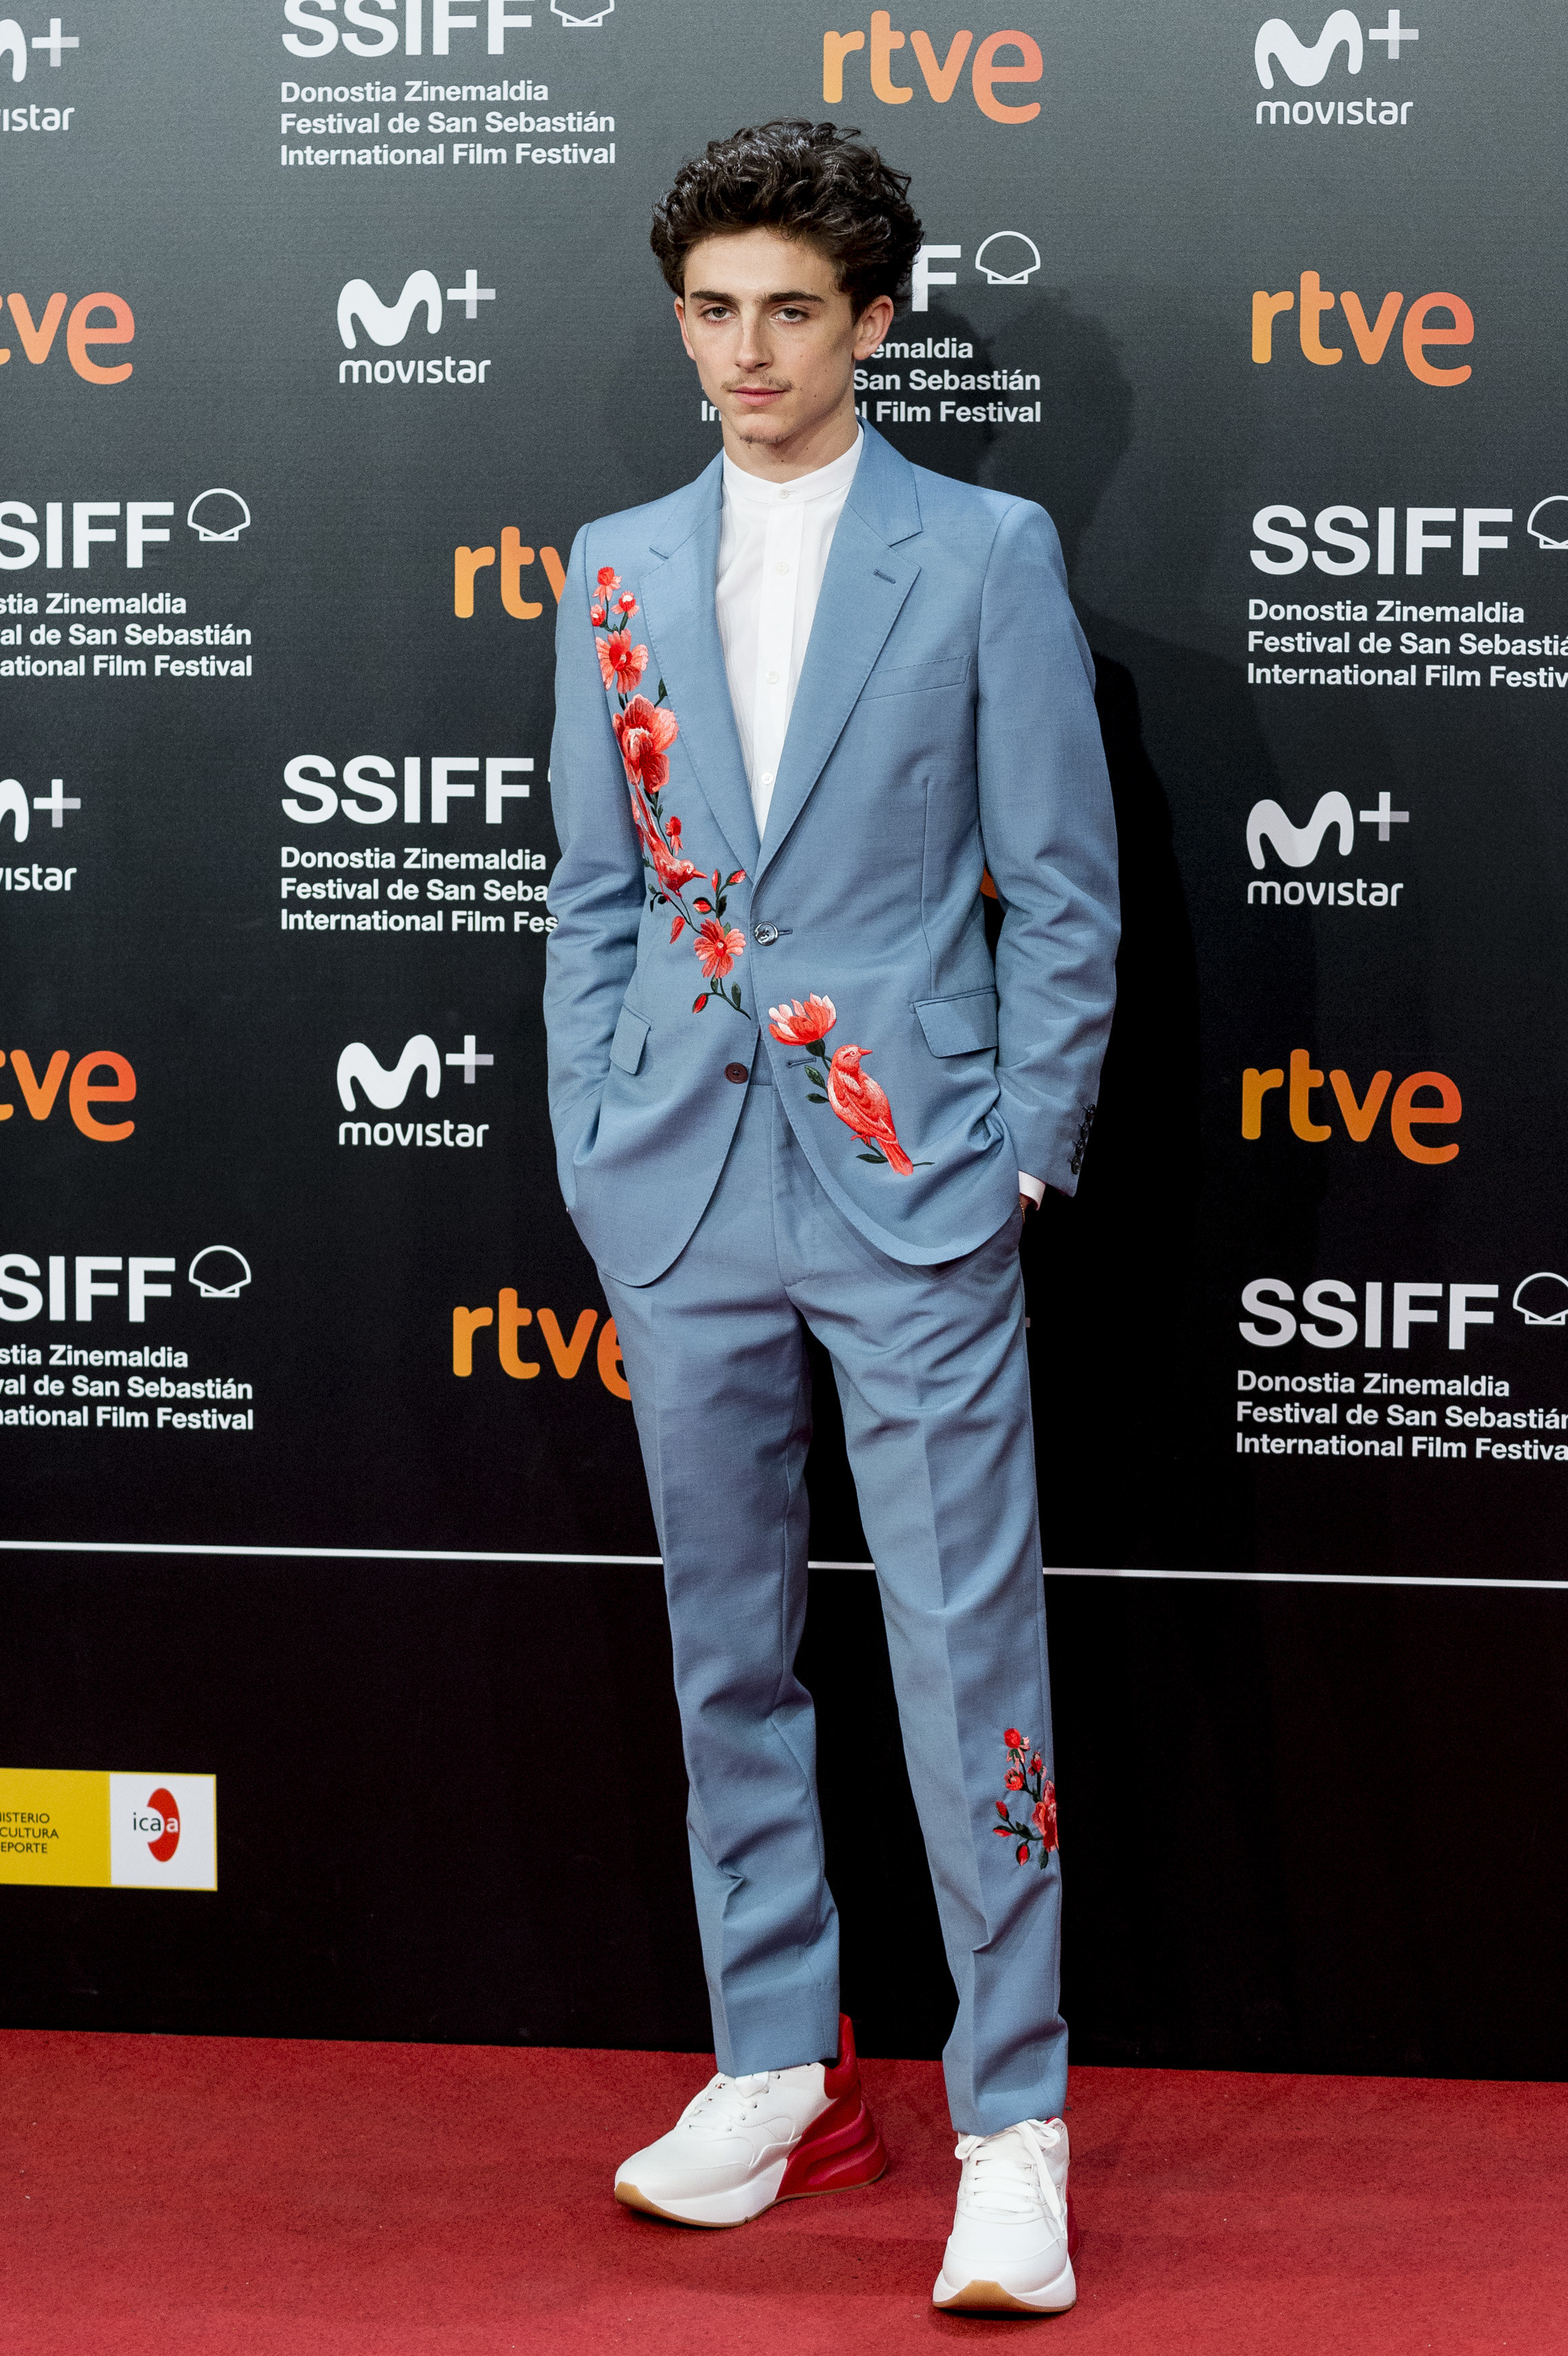 Timothée wears a light blue suit with embroidered red flowers across the chest